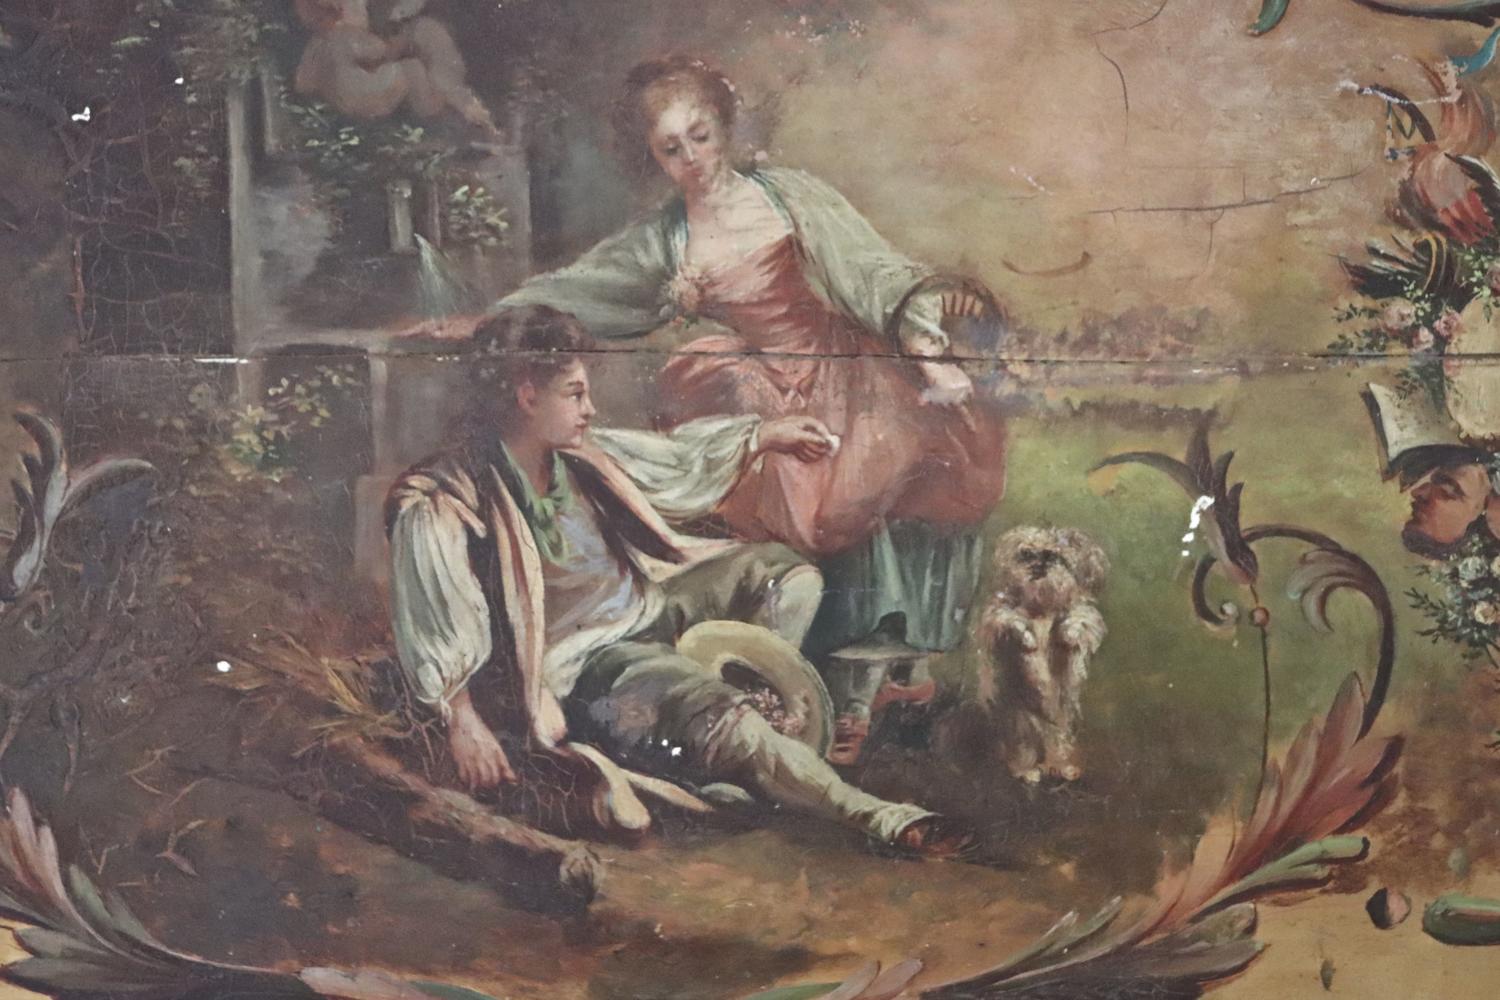 Painted wooden panel depicting a boy, girl and dog